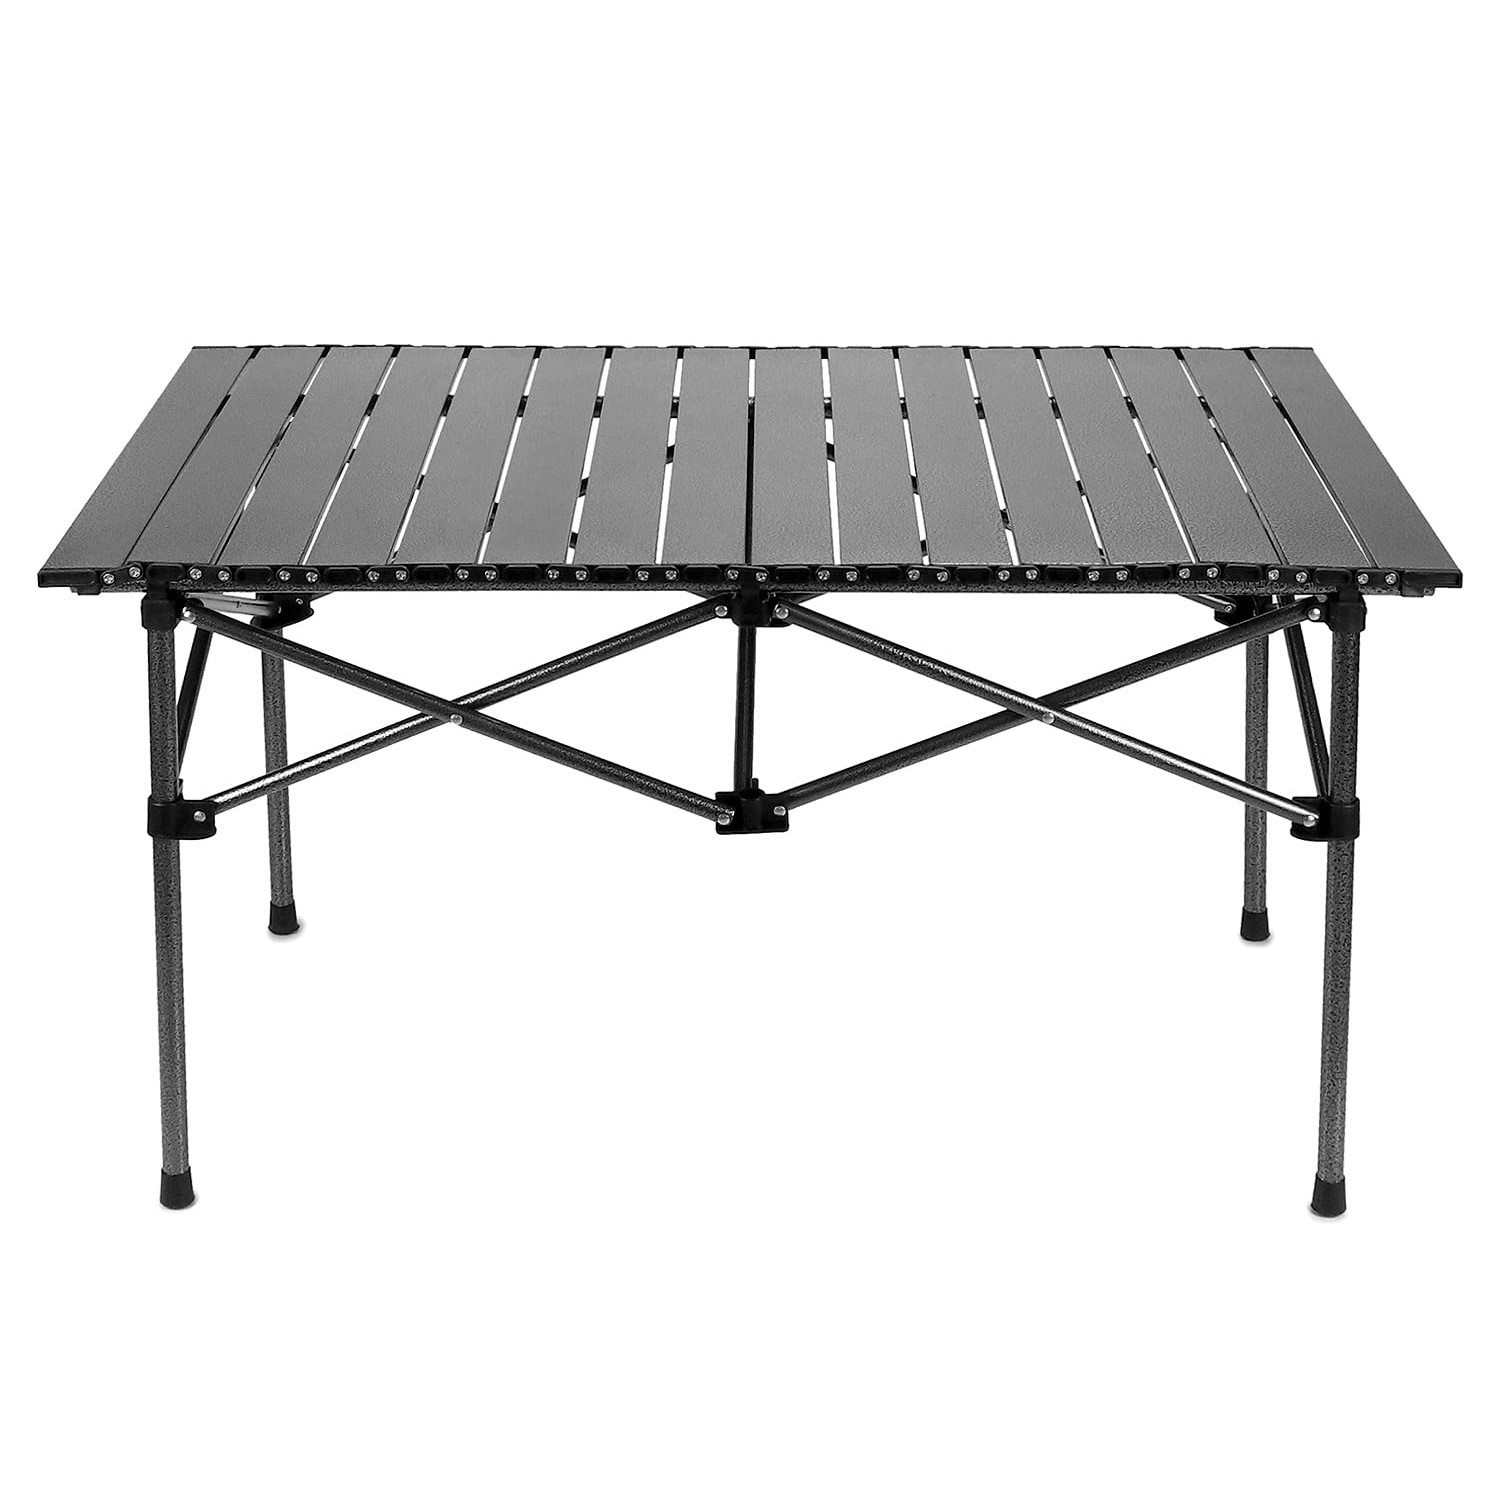 Camping Comfort: Creating a Cozy Campsite, PTT Outdoor, Foldable Eggroll Lightweight Camping Table 120 and 95cm 2,